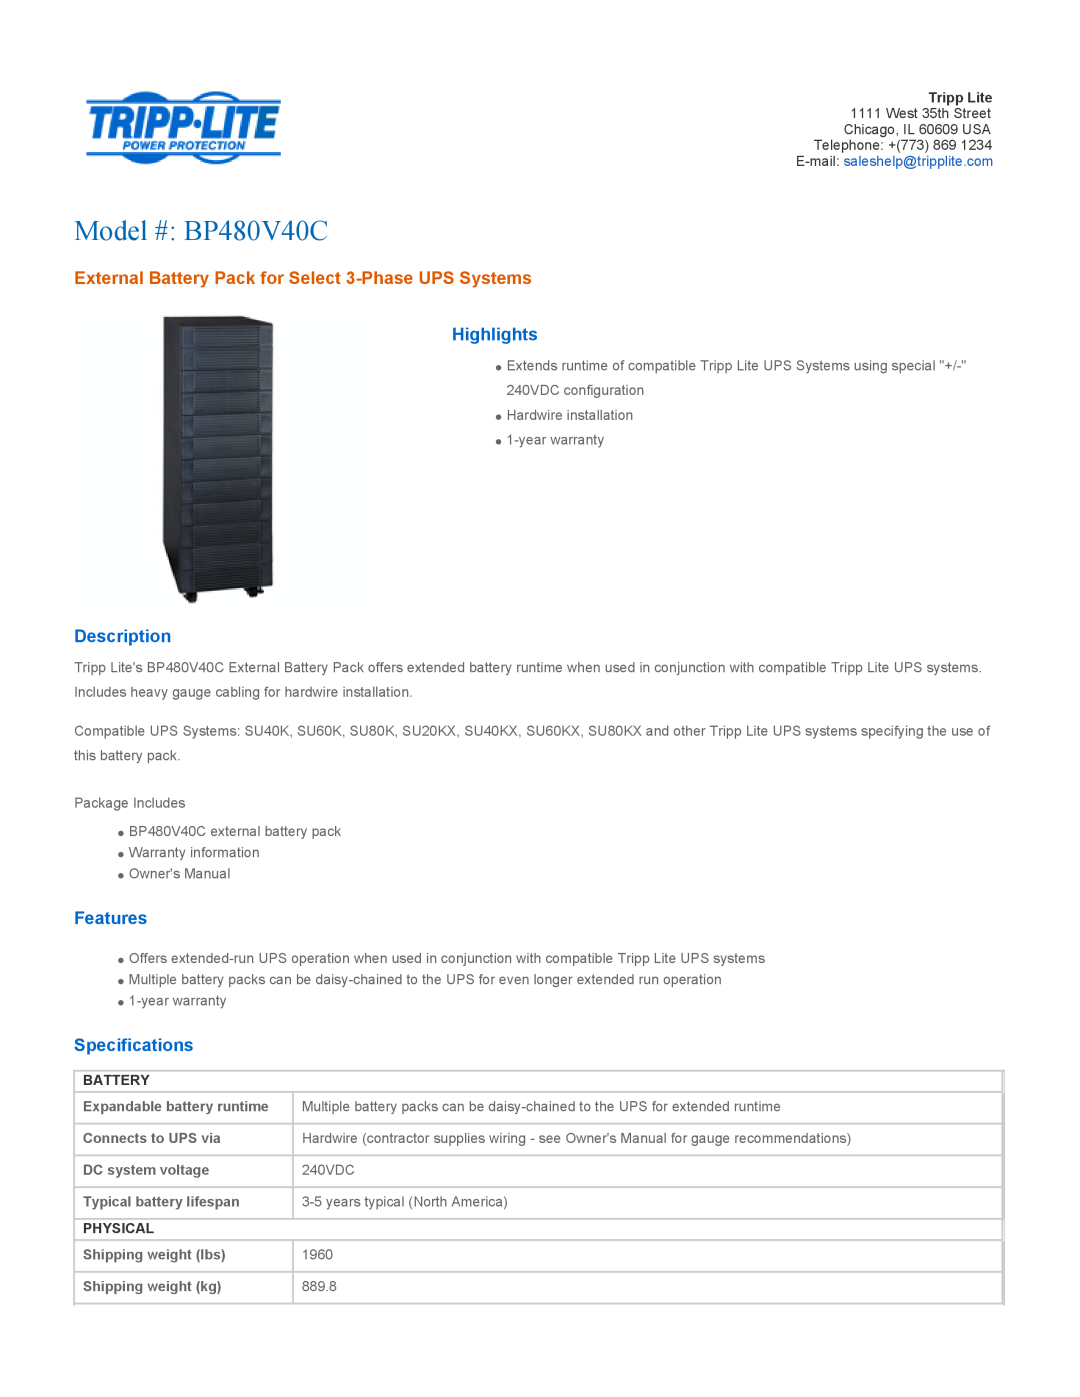 Tripp Lite BP480V40C specifications Expandable battery runtime, Connects to UPS via, DC system voltage, Shipping weight kg 